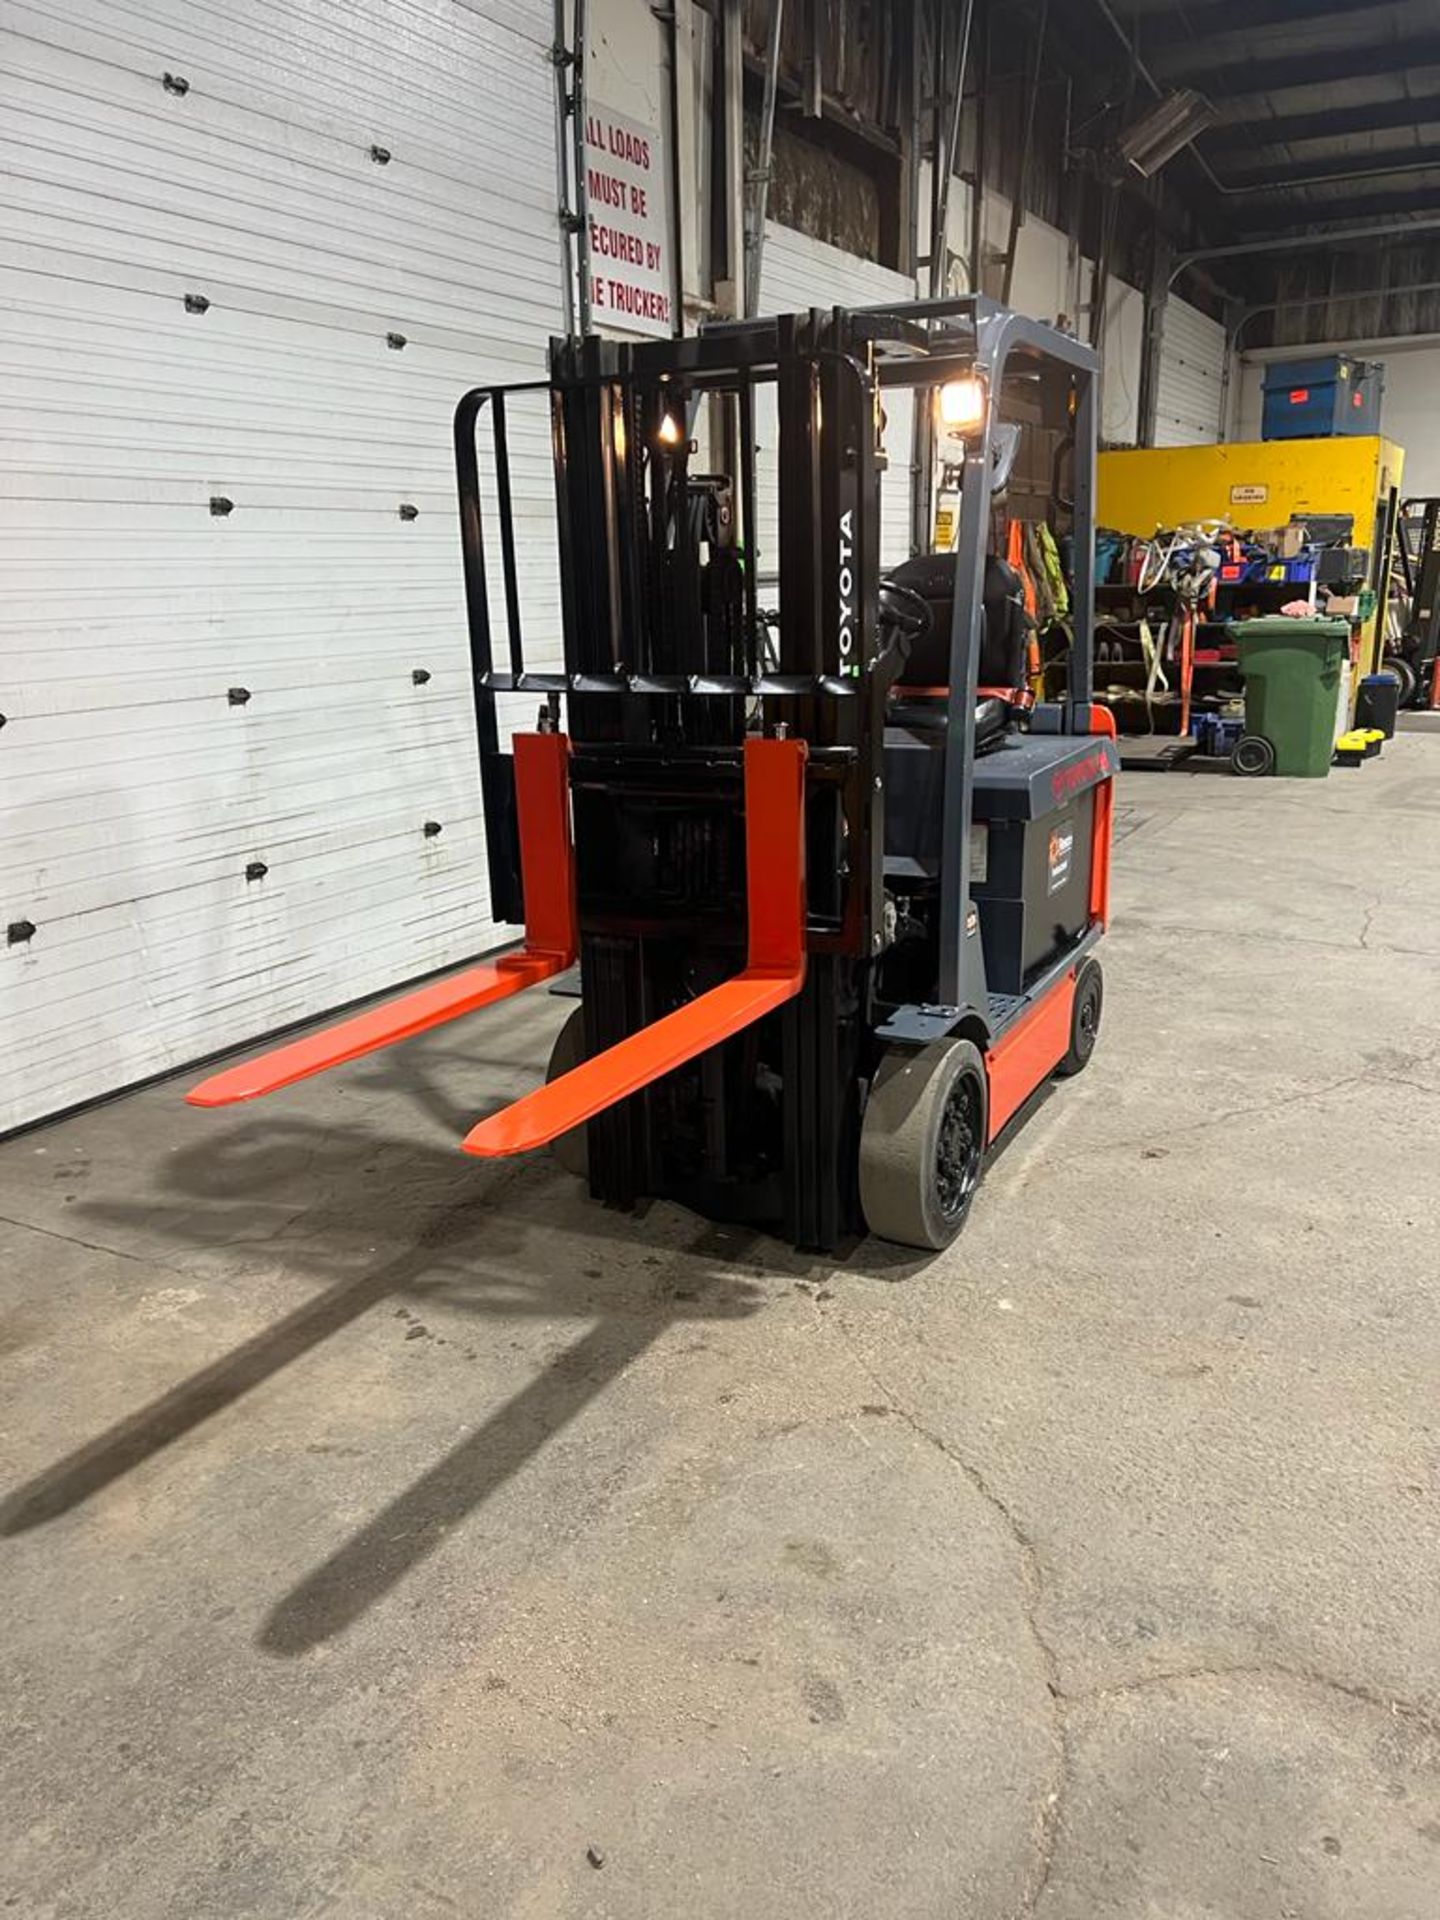 2014 Toyota 5,000lbs Capacity Forklift Electric 48V with 48" FORKS with Sideshift & Plumbed for Fork - Image 2 of 3